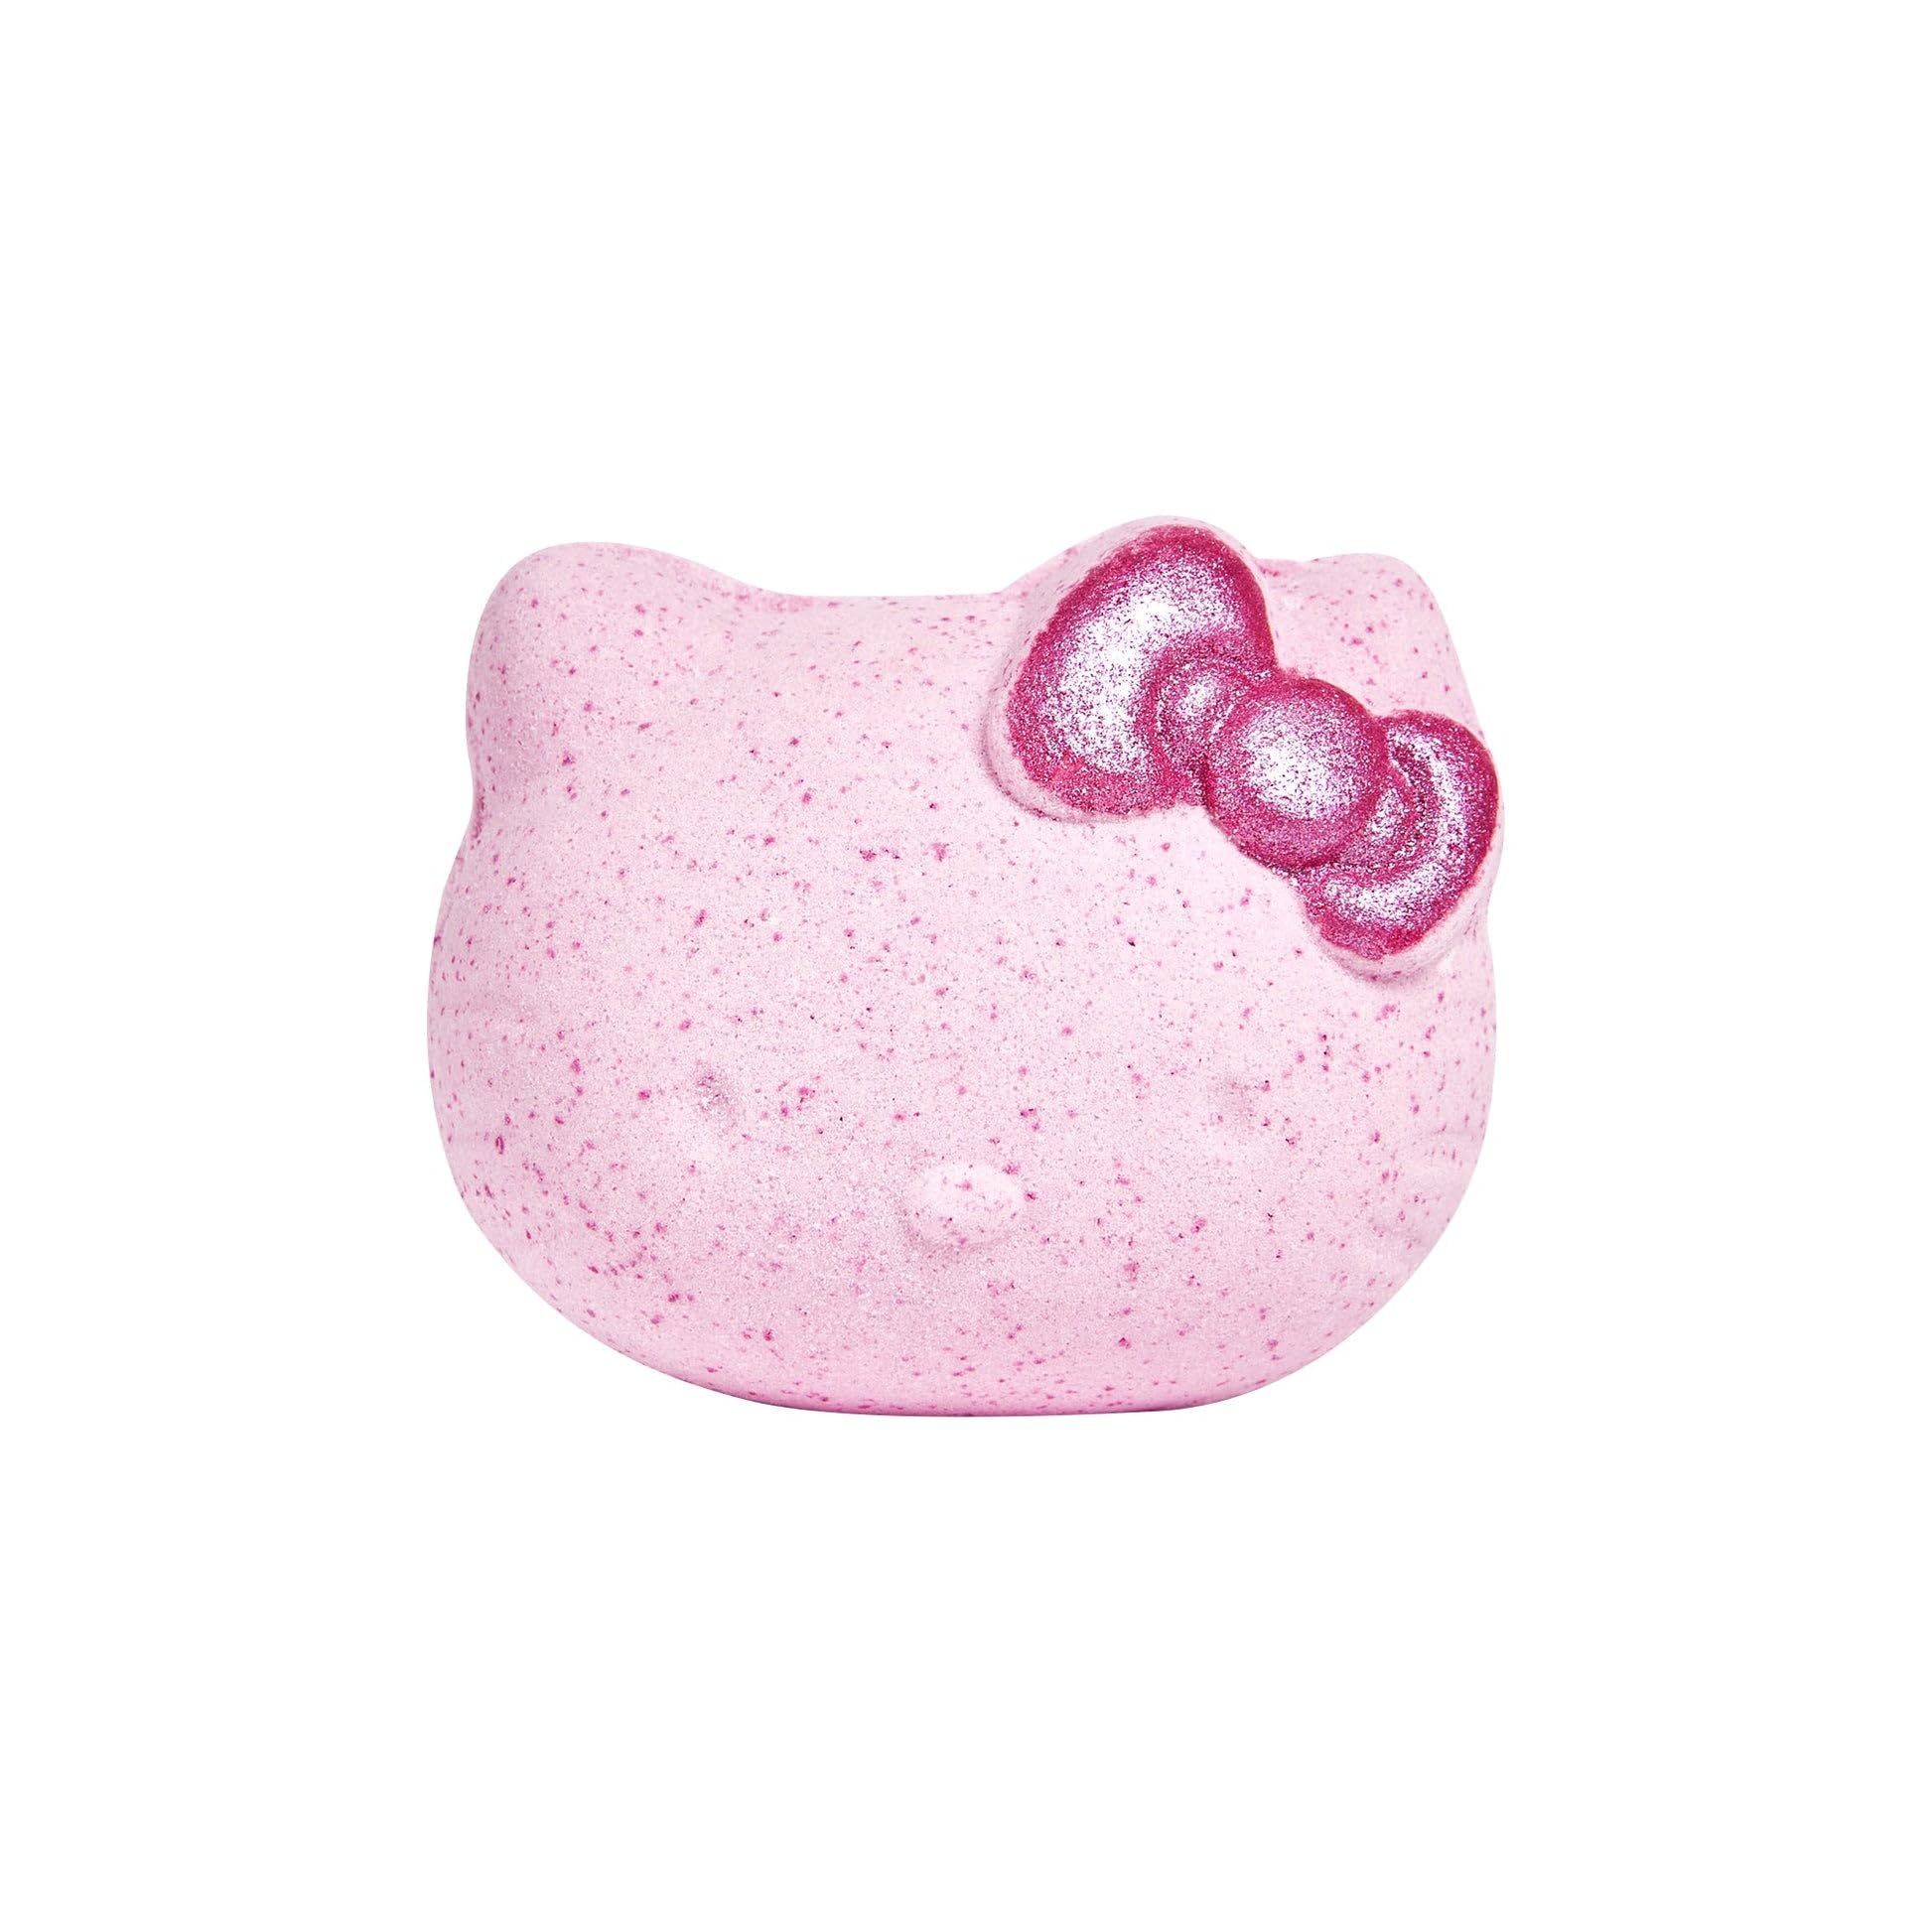 The Crème Shop x Hello Kitty Bath Bombs: Fizzing, Soothing, Moisturizing, Aromatherapy, Relaxation, Spa-Like Experience for Silky Smooth Skin (Strawberry Cocoa) Set of 1 PK